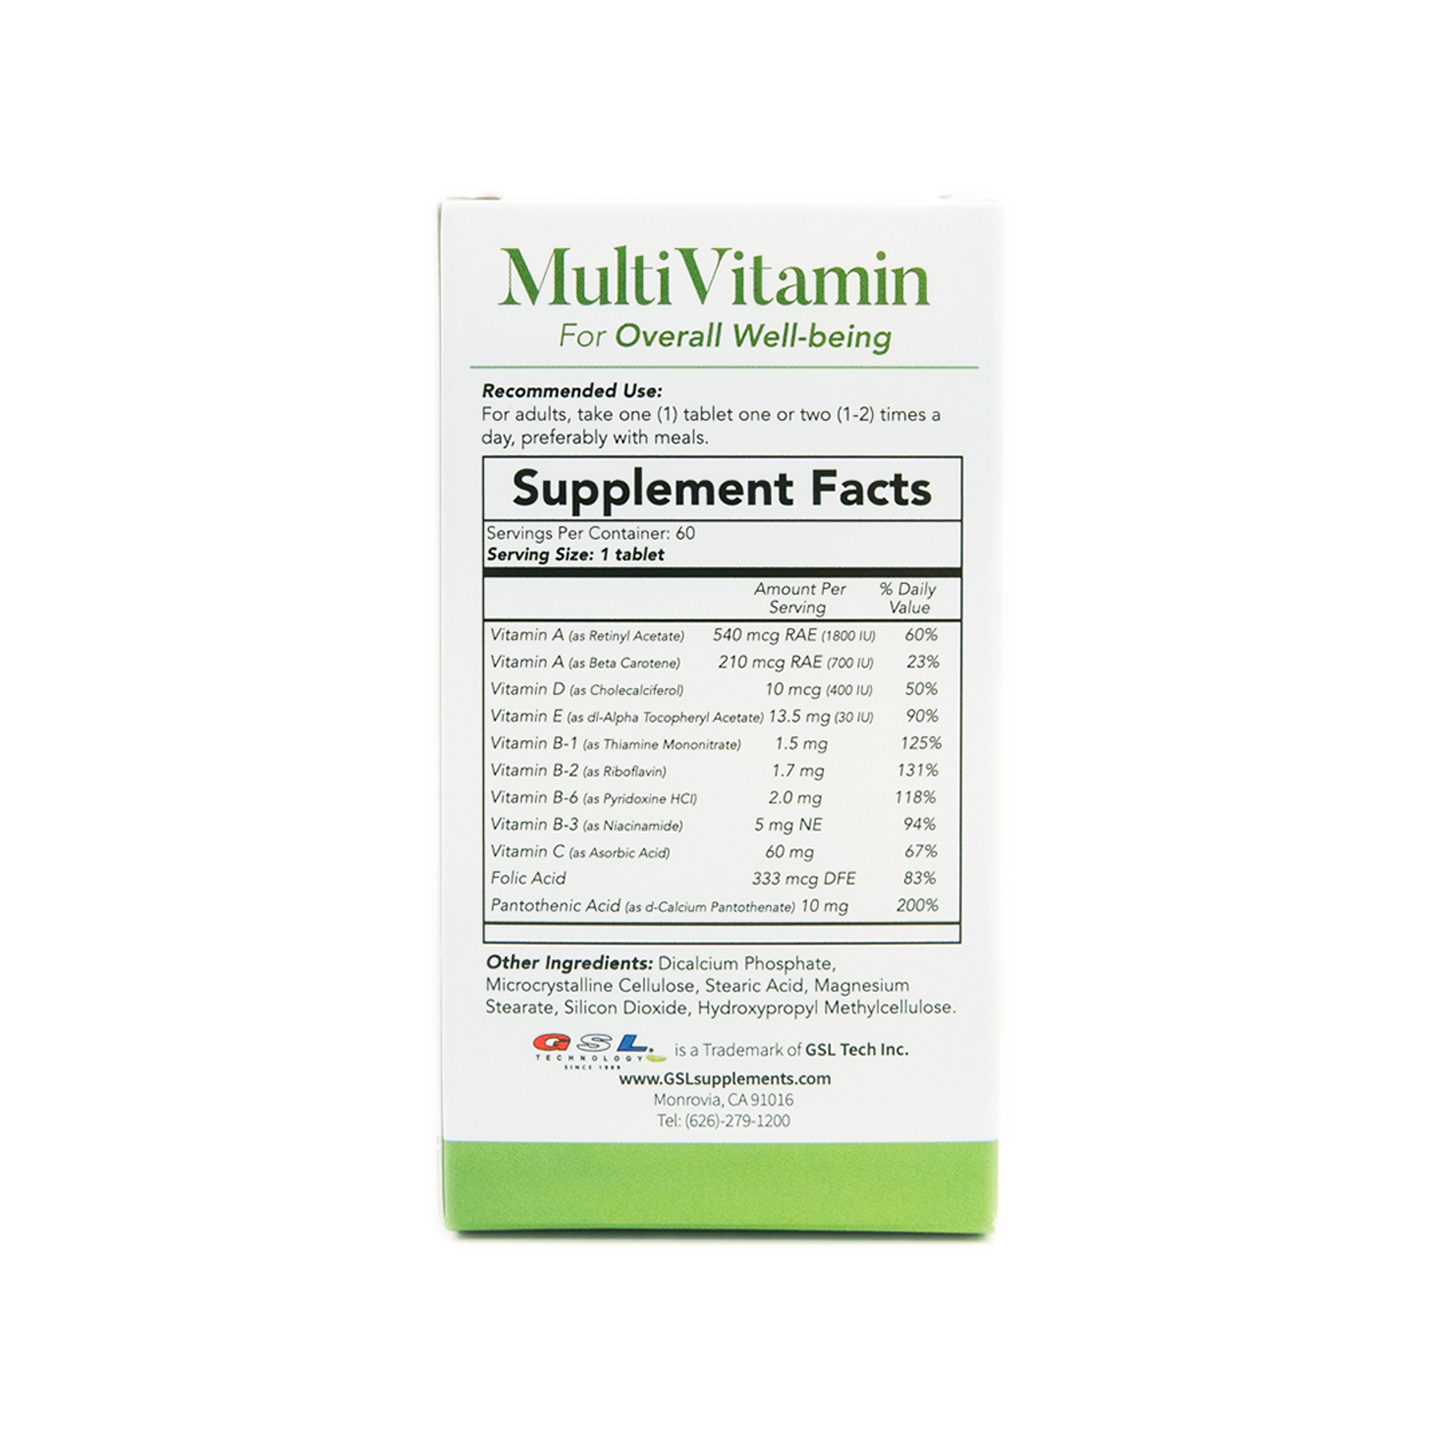 Multi-Vitamin | Contains 11 Key Vitamins for Daily Nutritional Support | for Overall Well-Being | Made in USA